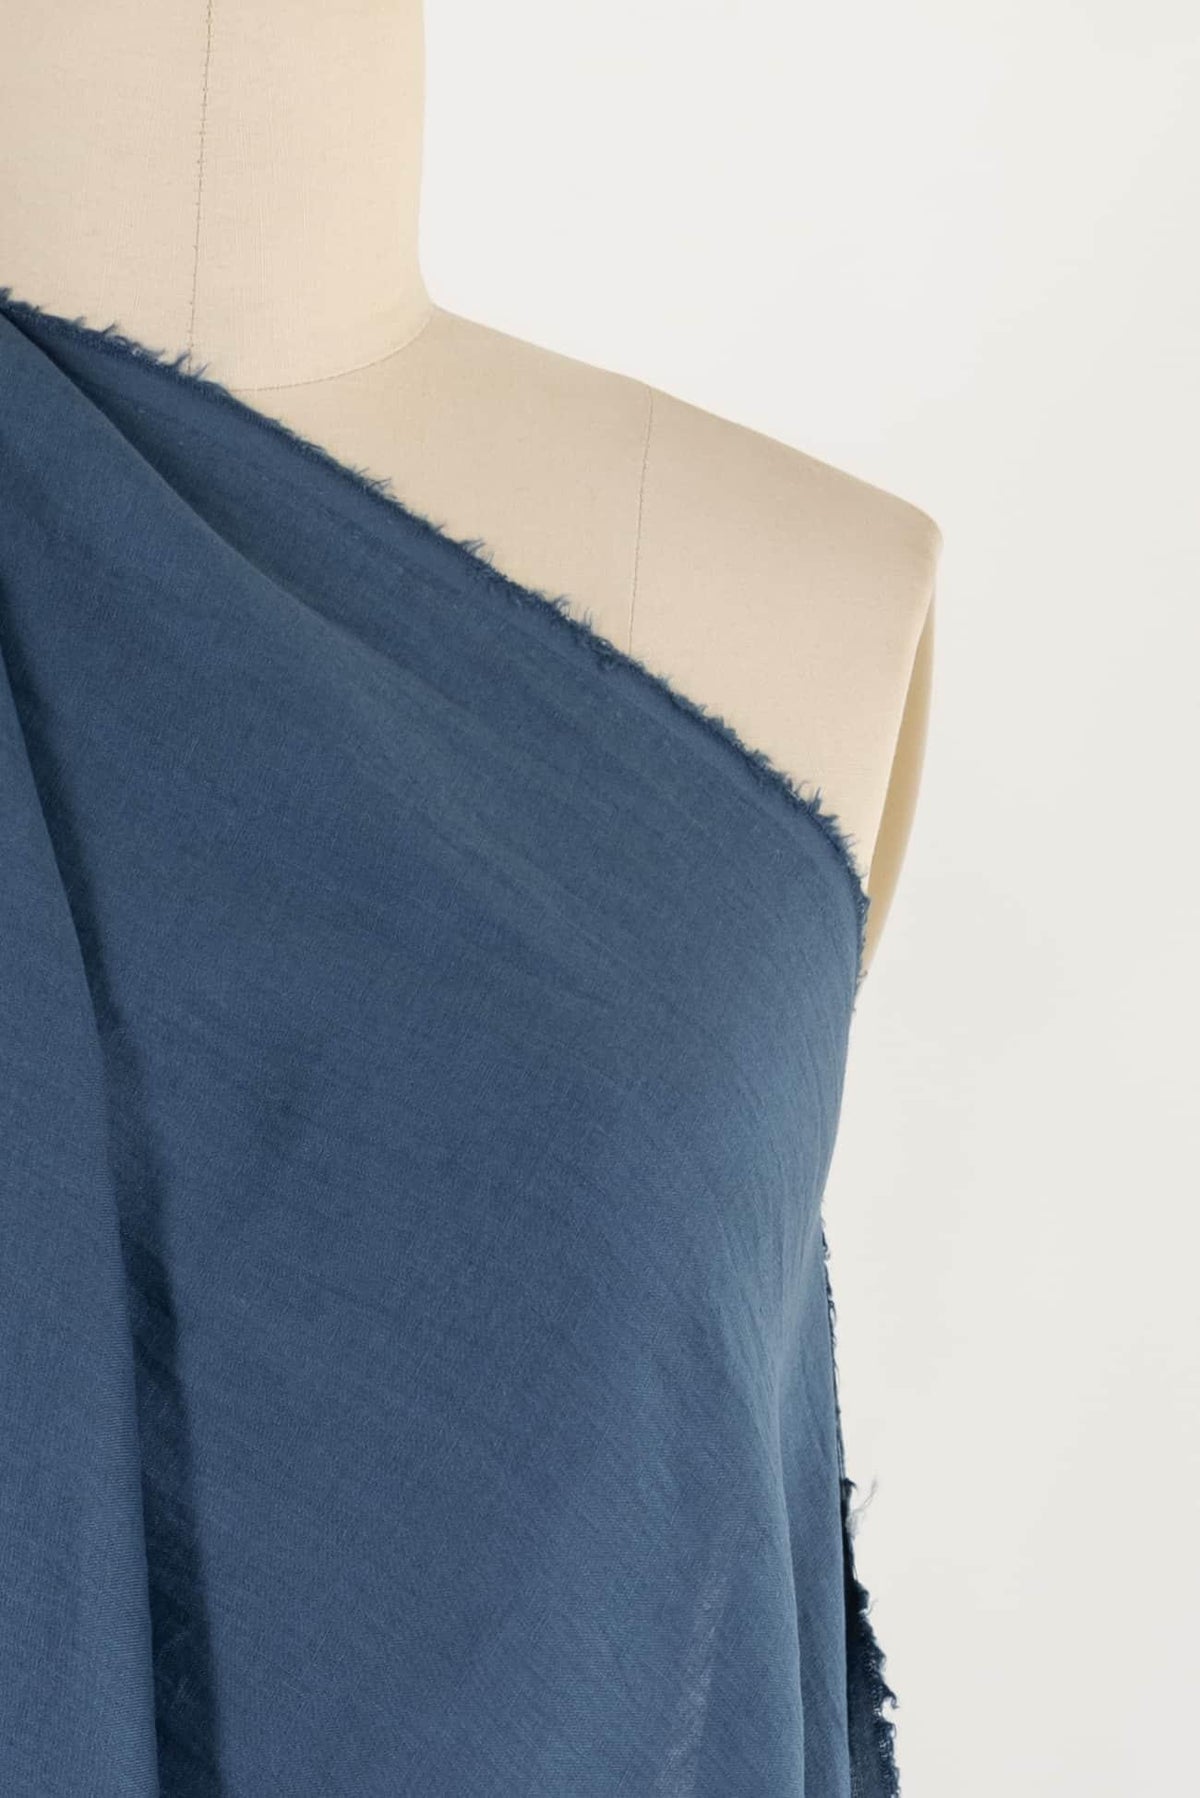 Cerulean Washed Linen Woven - Marcy Tilton Fabrics